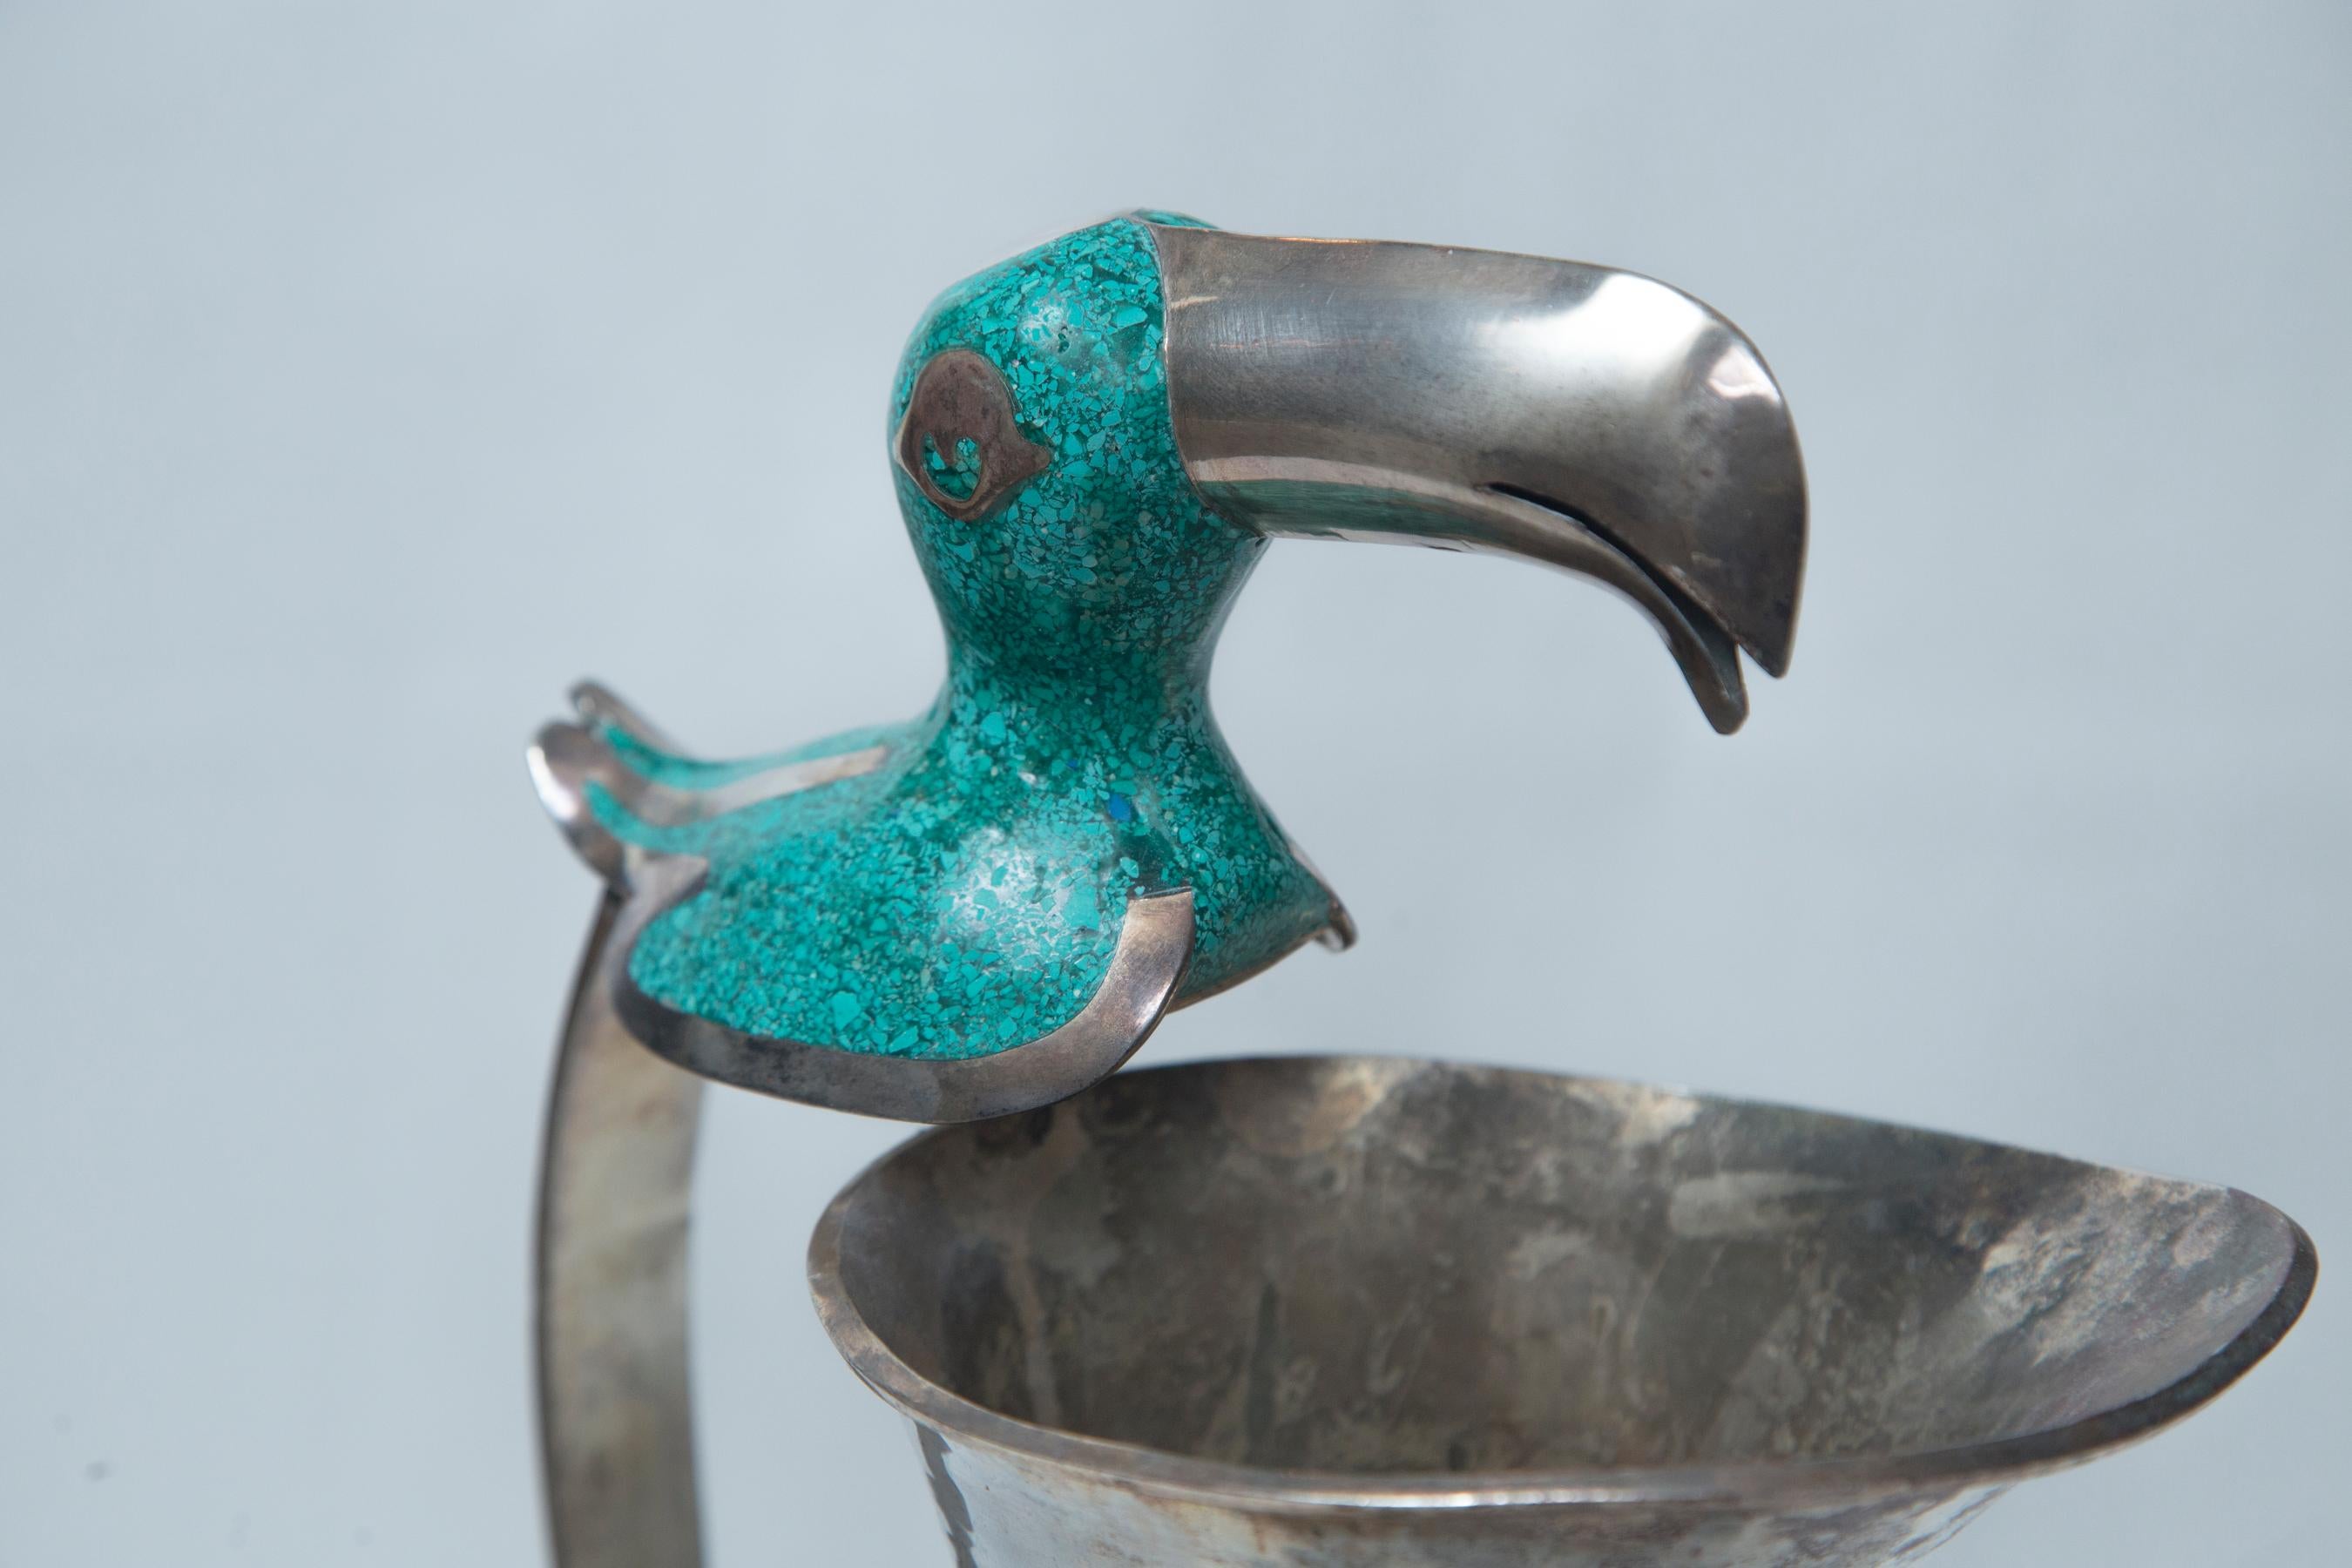 The handles inlaid with and the heads covered in turquoise.
Unsigned.
They are of different heights. The toucan being 14 inches tall with a 6 inch diameter at its widest point (approximate.) The parrot being 14.5 inches tall, with a 7 inch